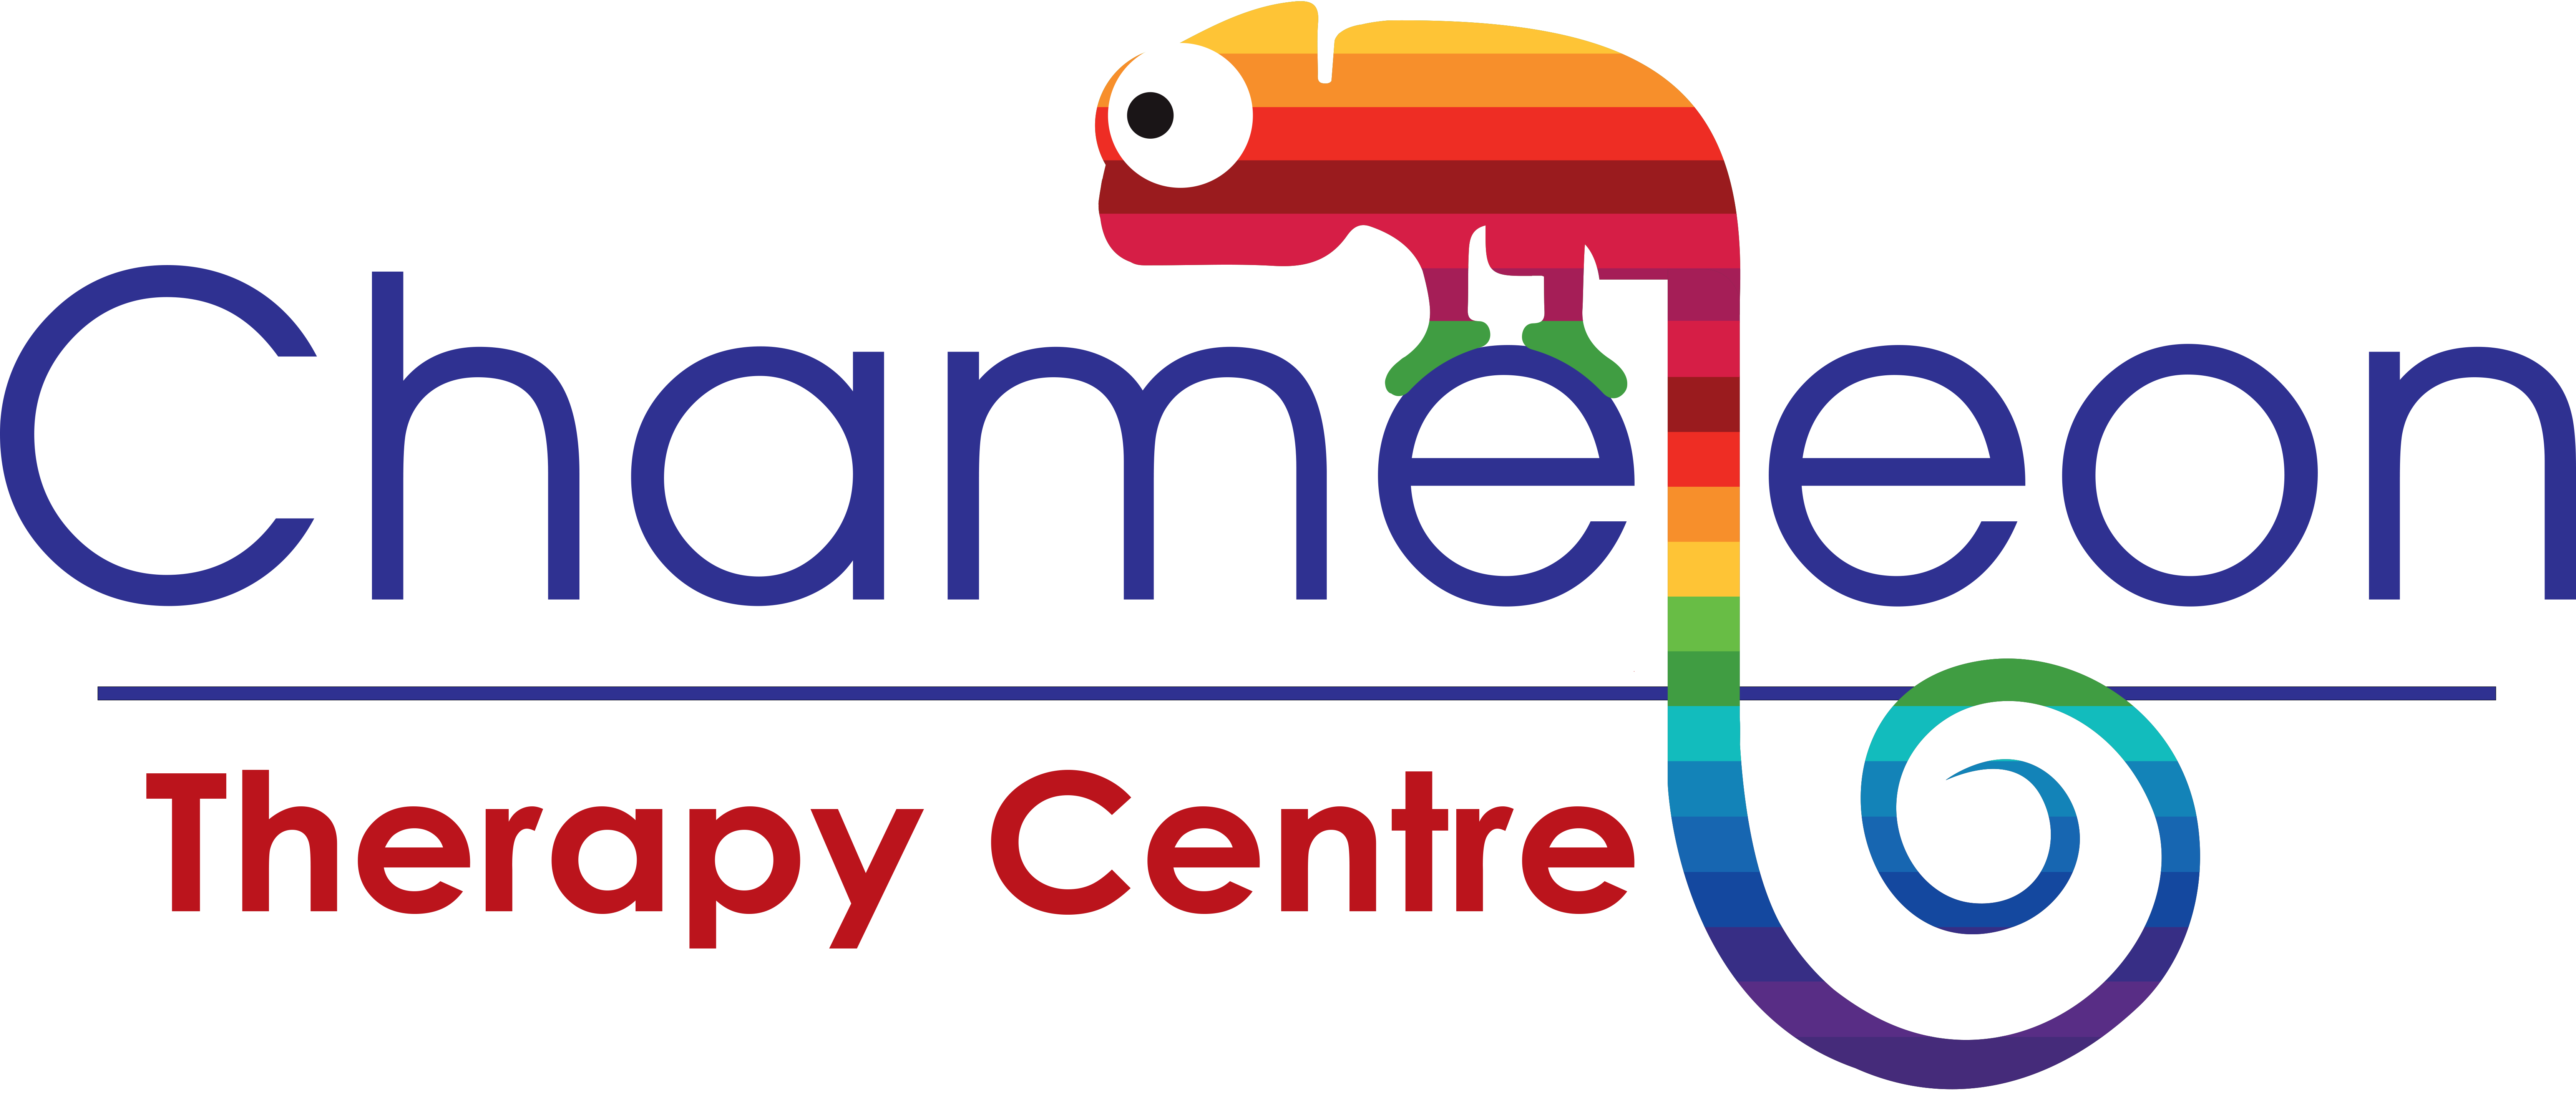 Chameleon Therapy Centre